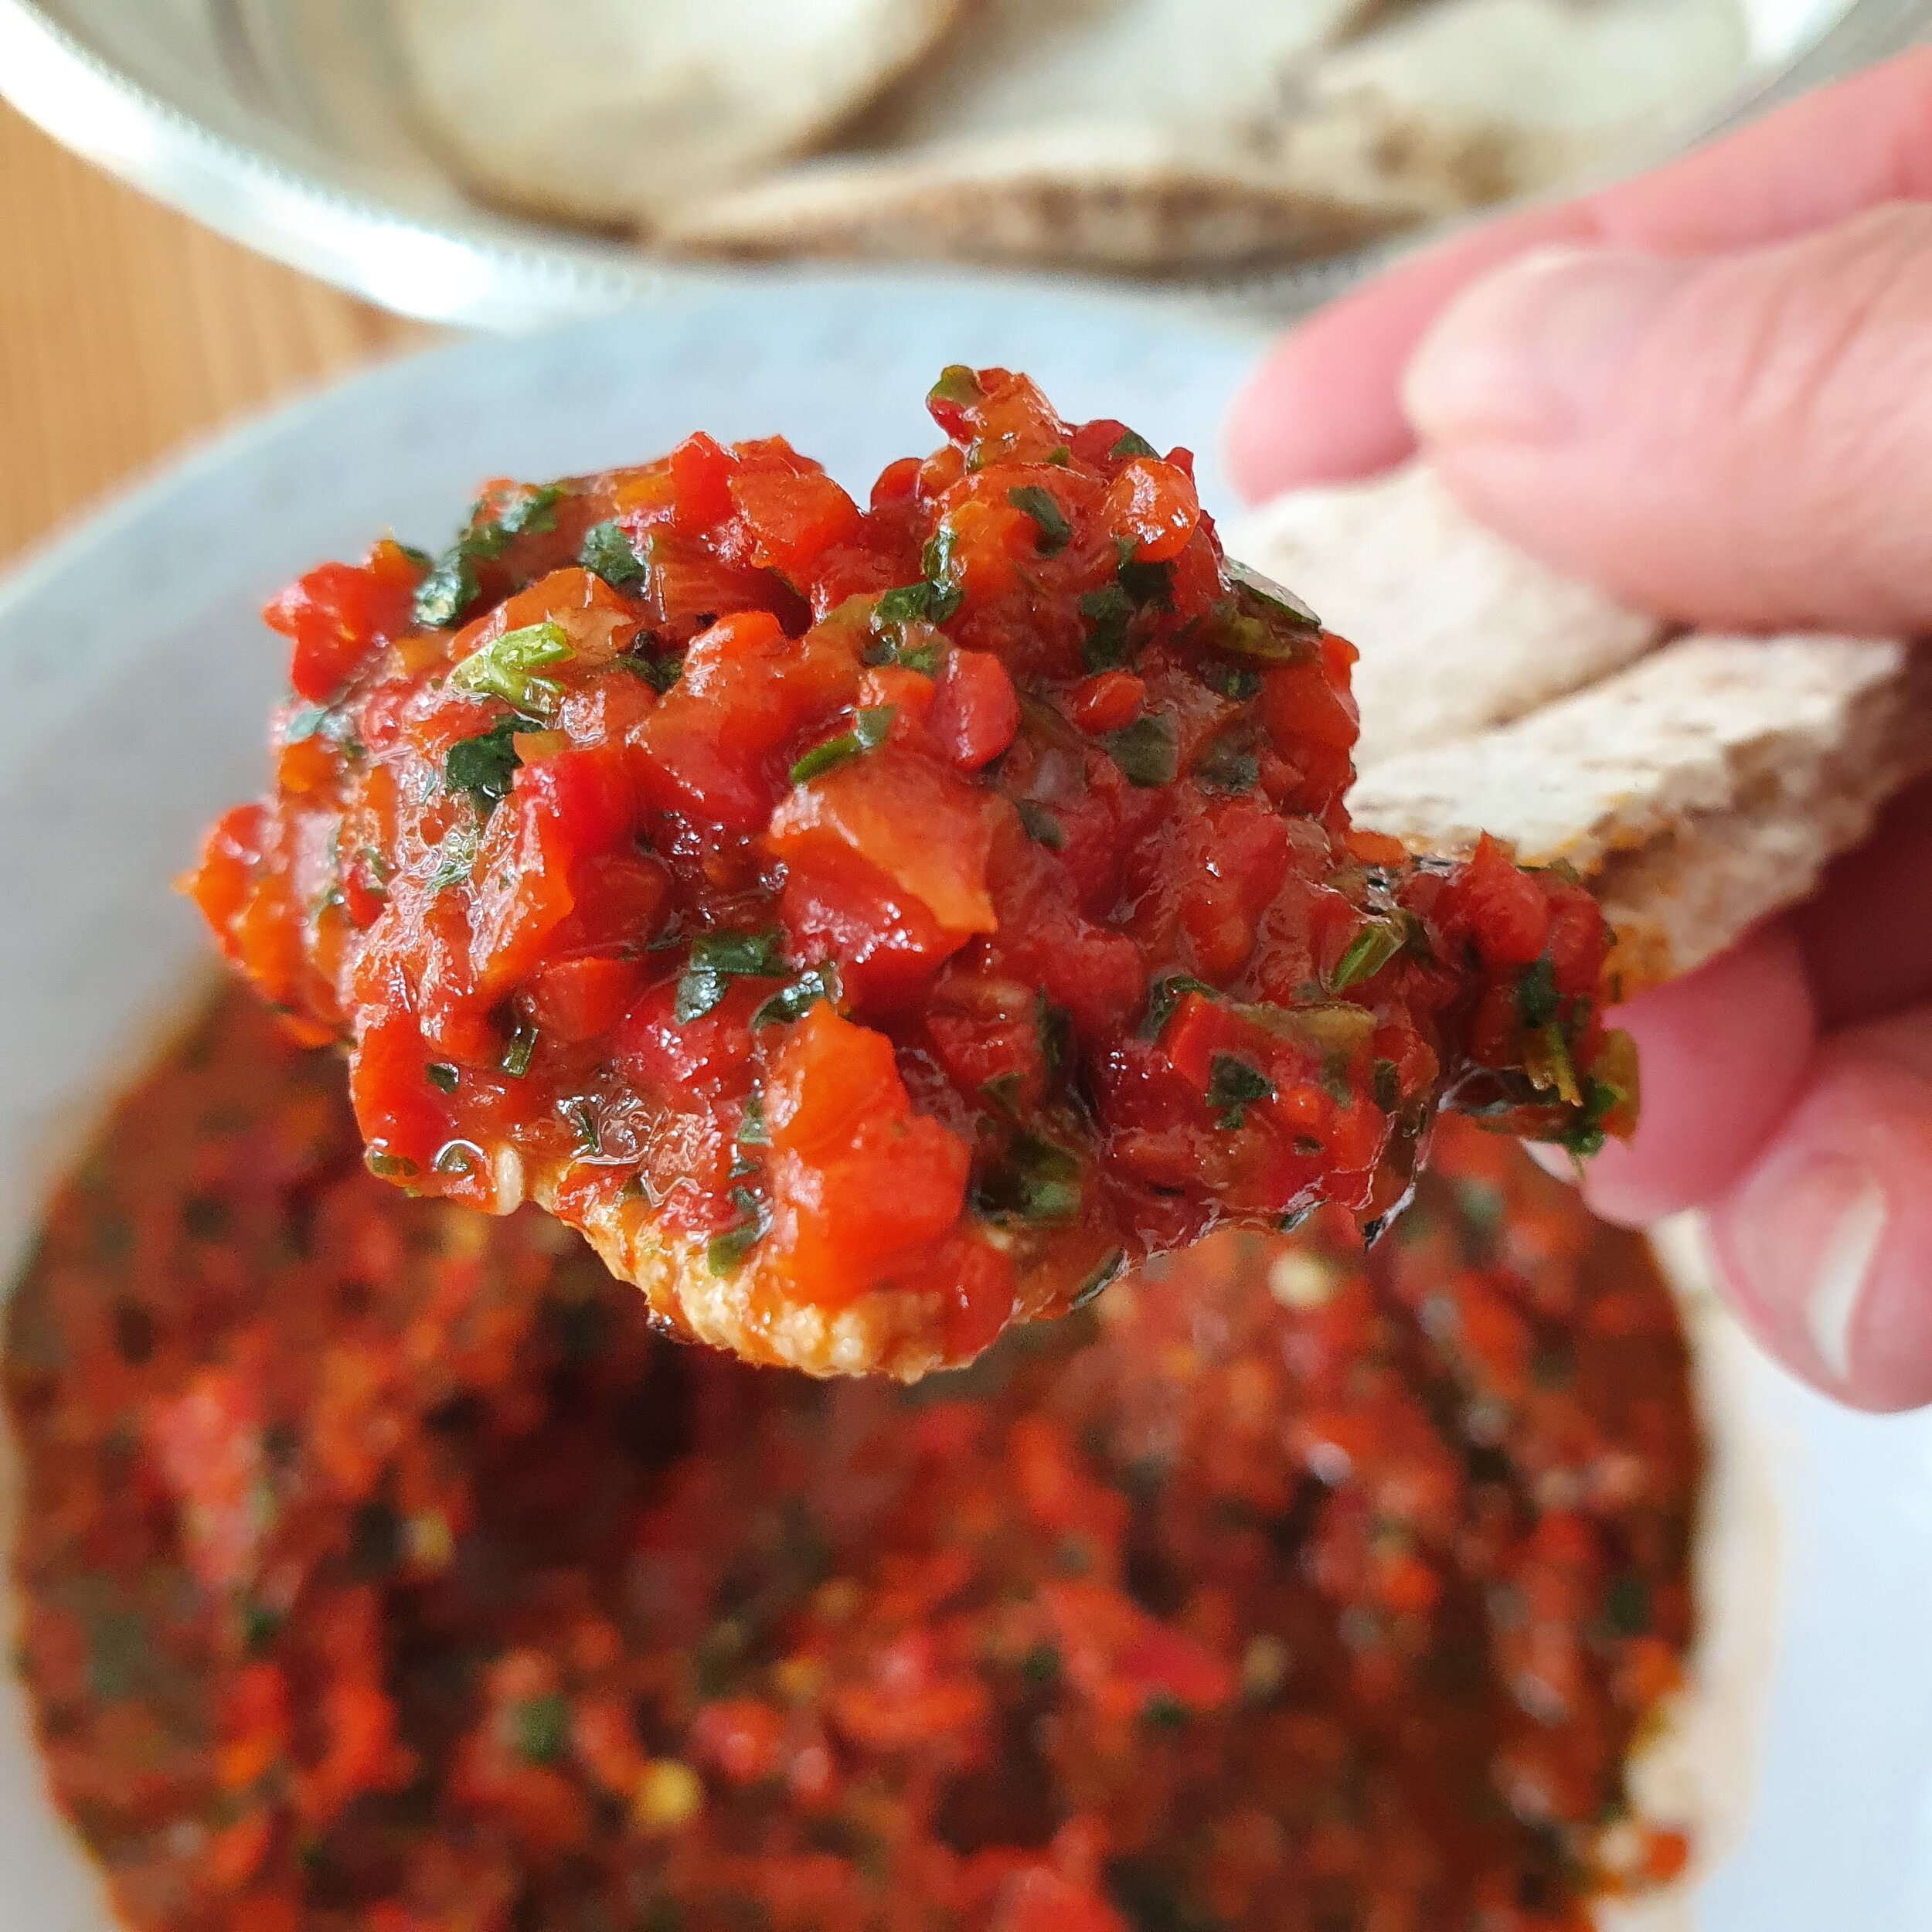 https://www.whatseatingher.co.uk/sauce-and-dips/red-pepper-and-chilli-sauce